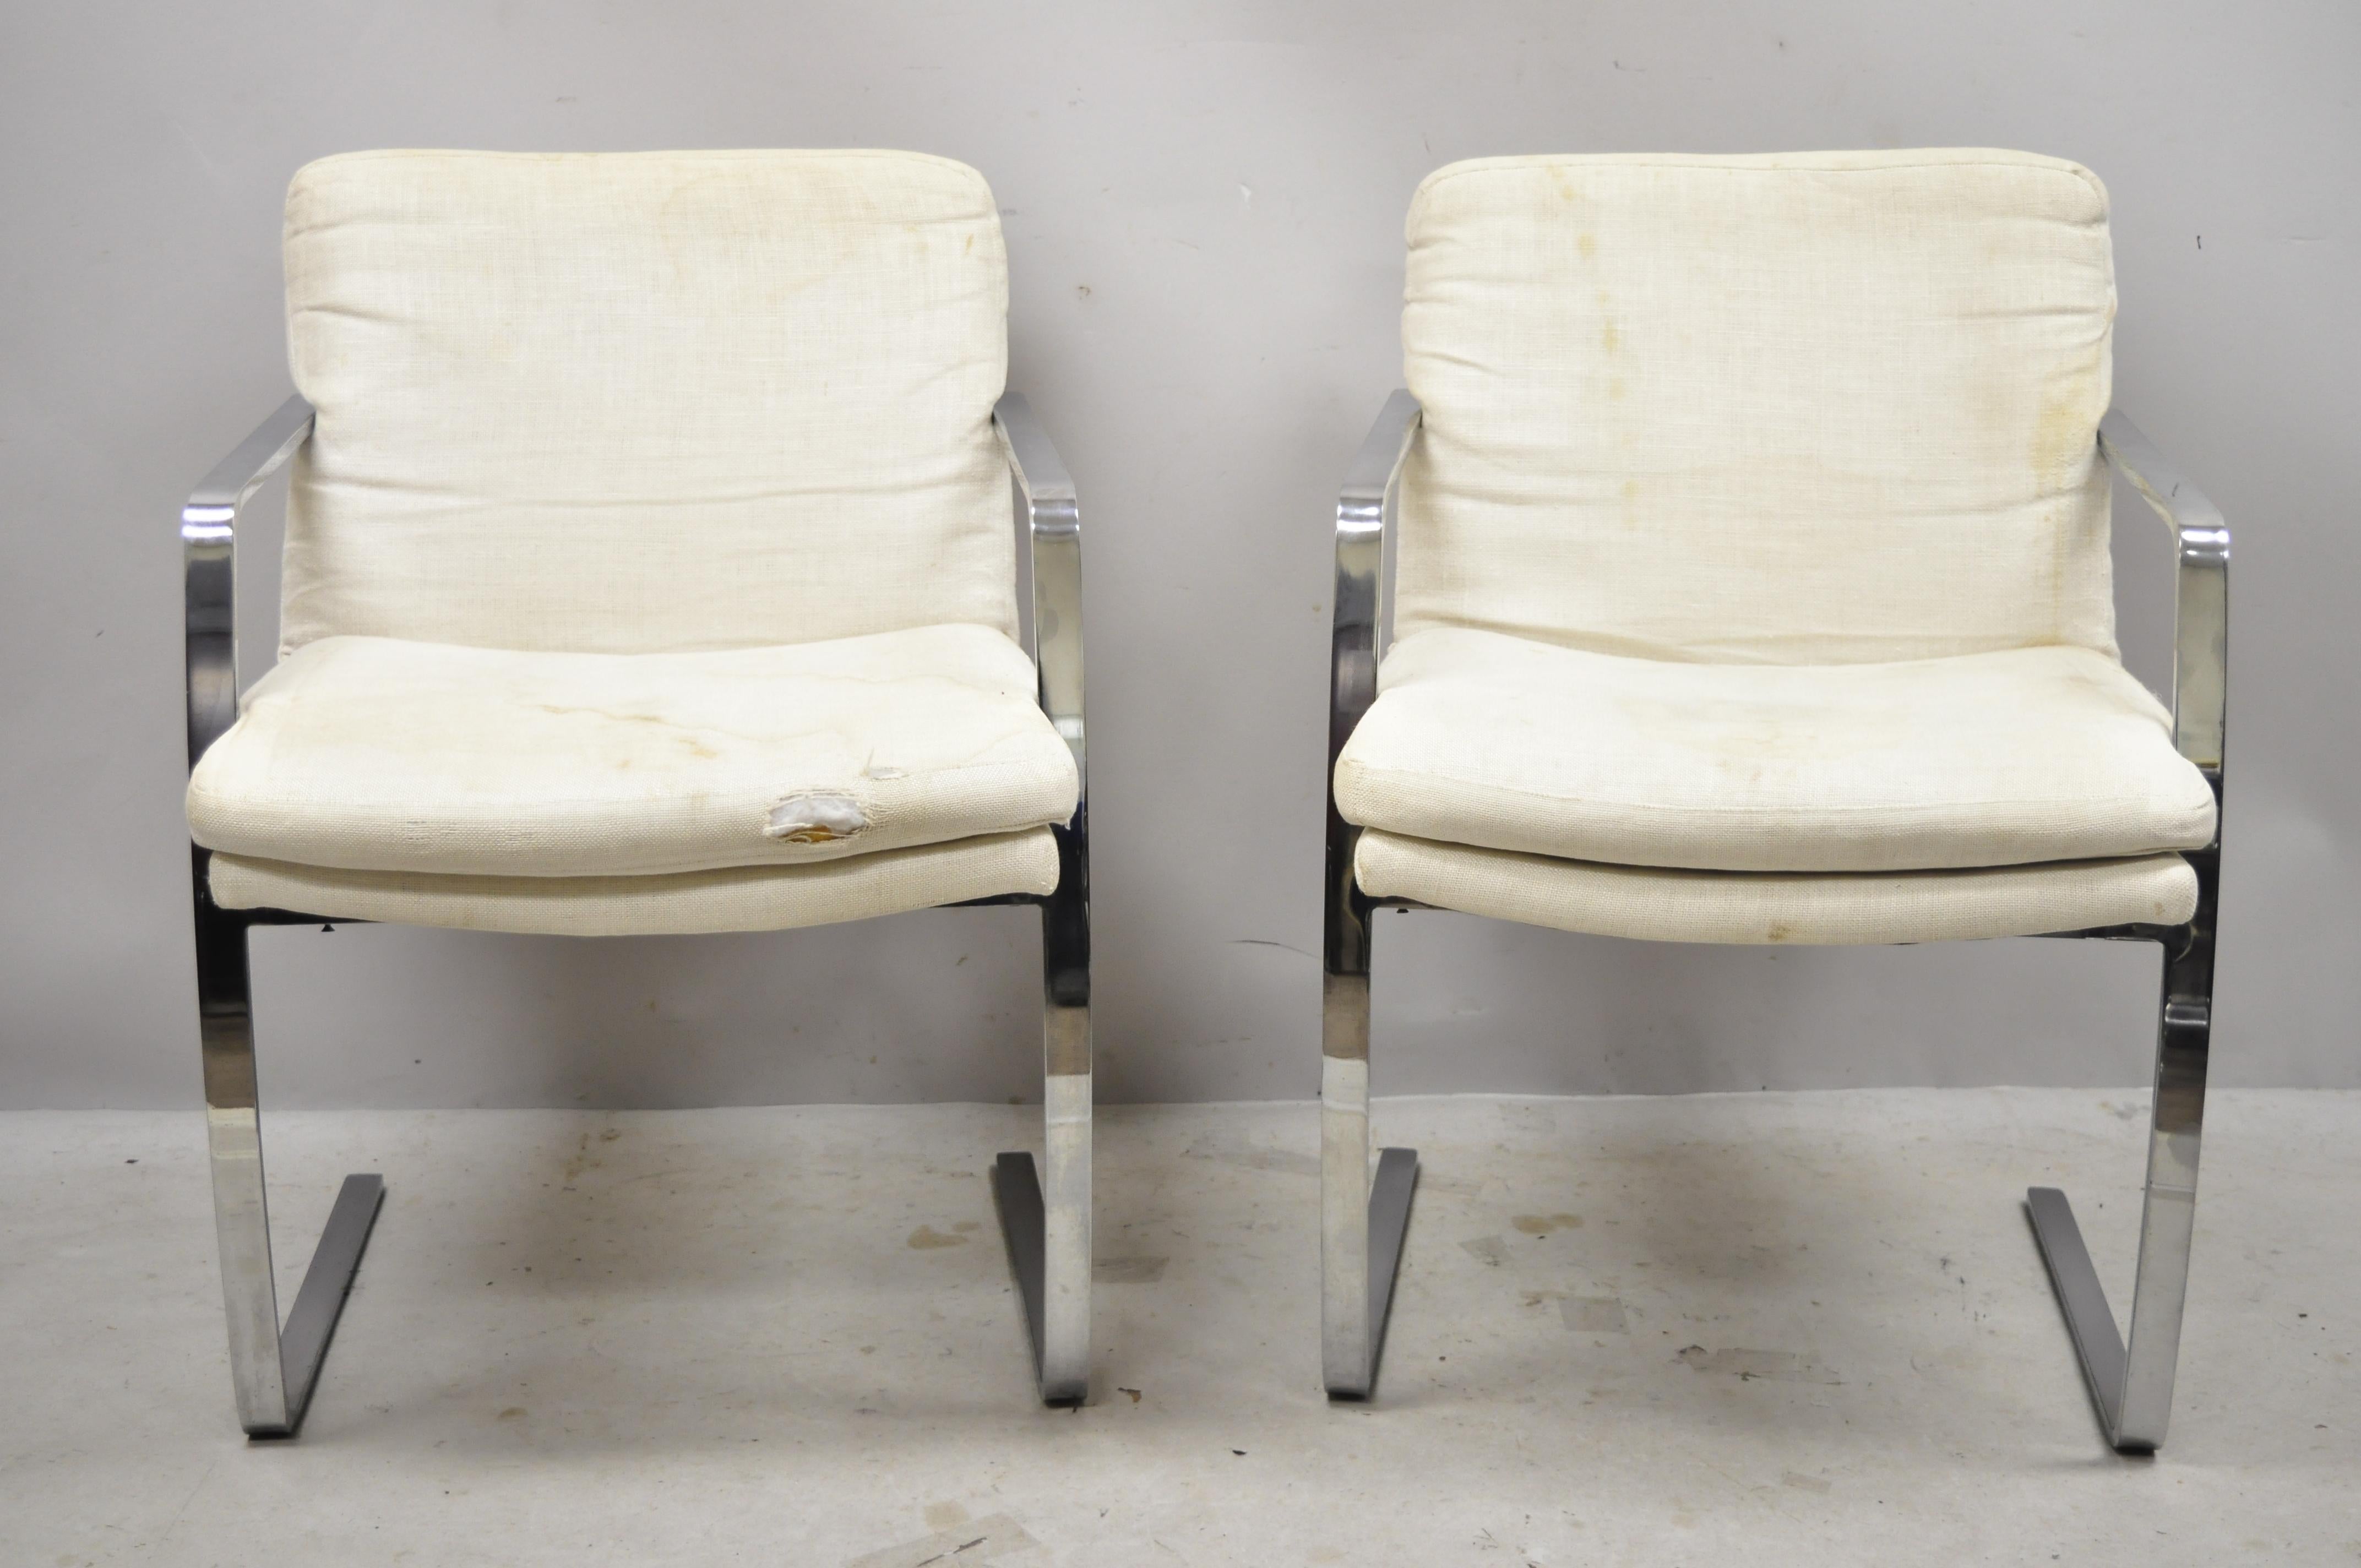 Vintage Mid-Century Modern BRNO style chrome cantilever lounge armchairs (A) - a pair. Item features heavy chrome-plated steel cantilever frames, quality American craftsmanship, sleek sculptural form, circa mid-late 20th century. Measurements: 33